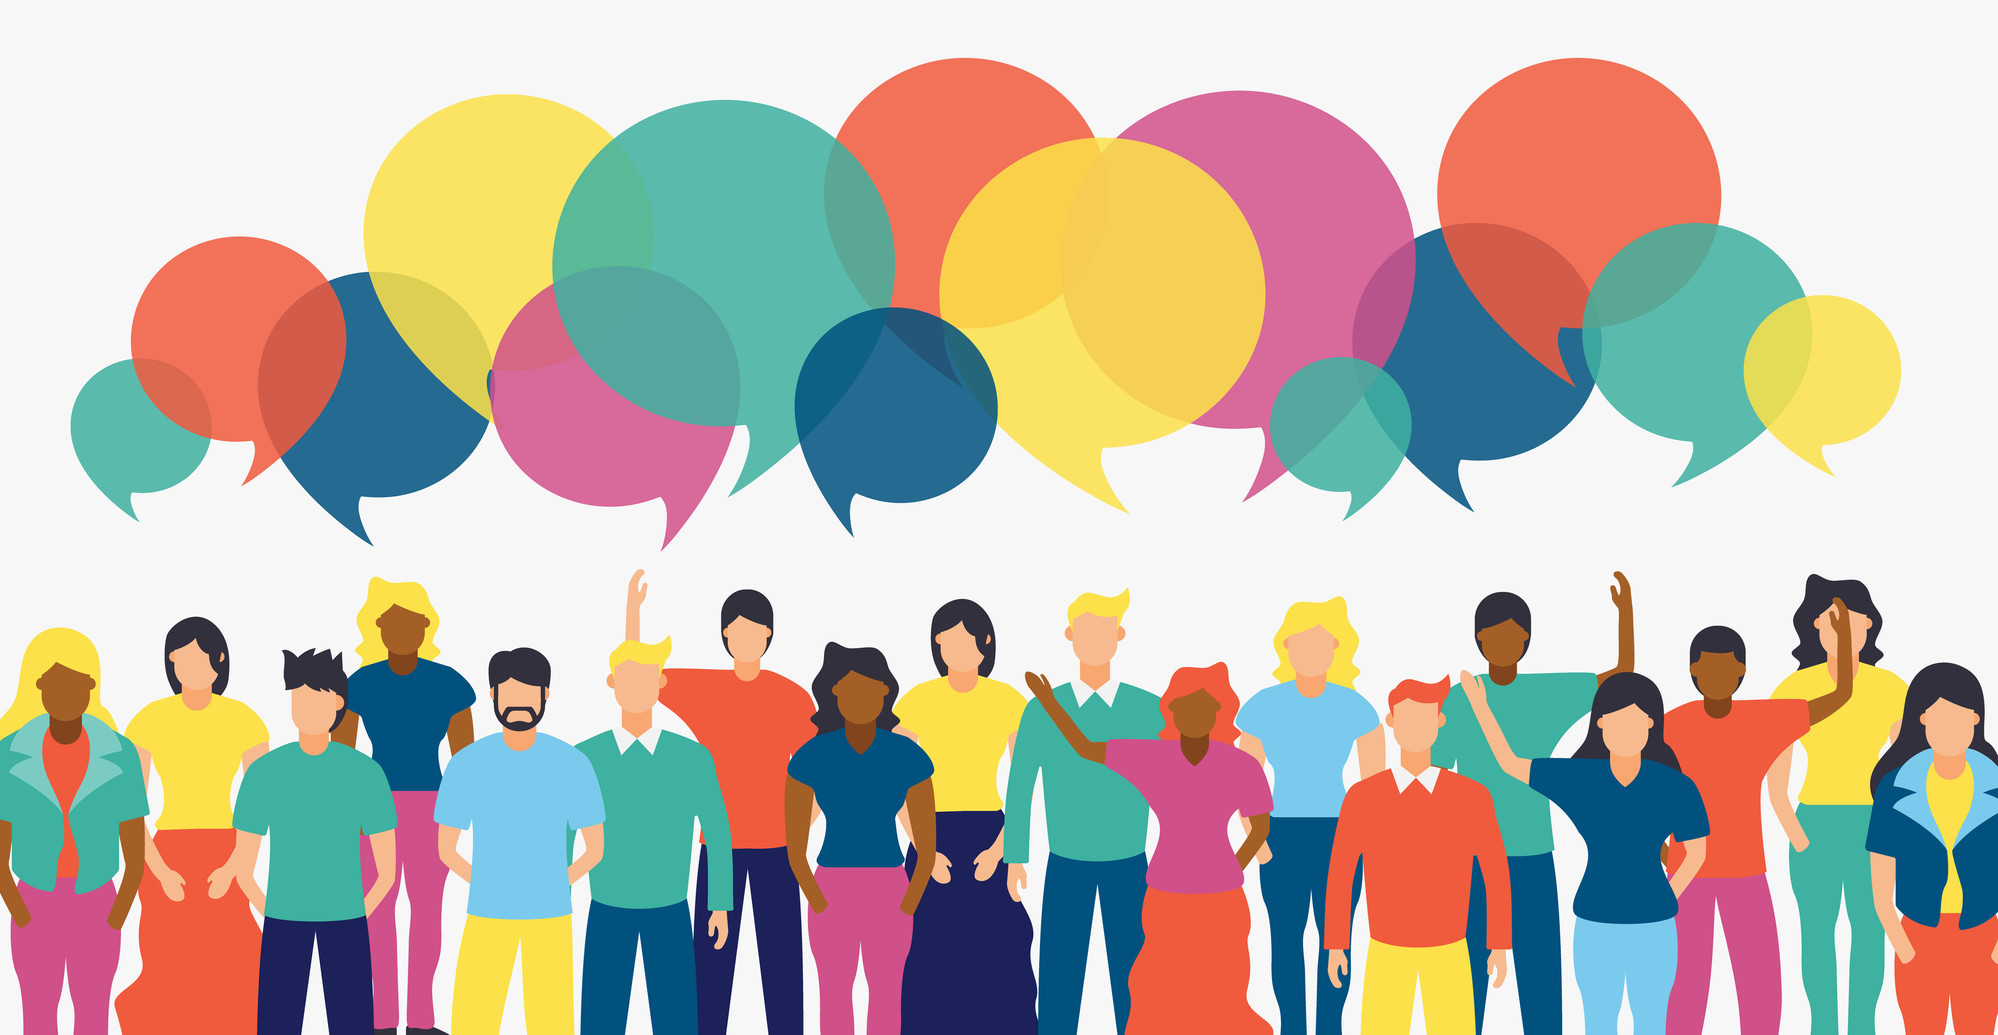 Illustrated group of people with colourful chat bubbles and diverse team